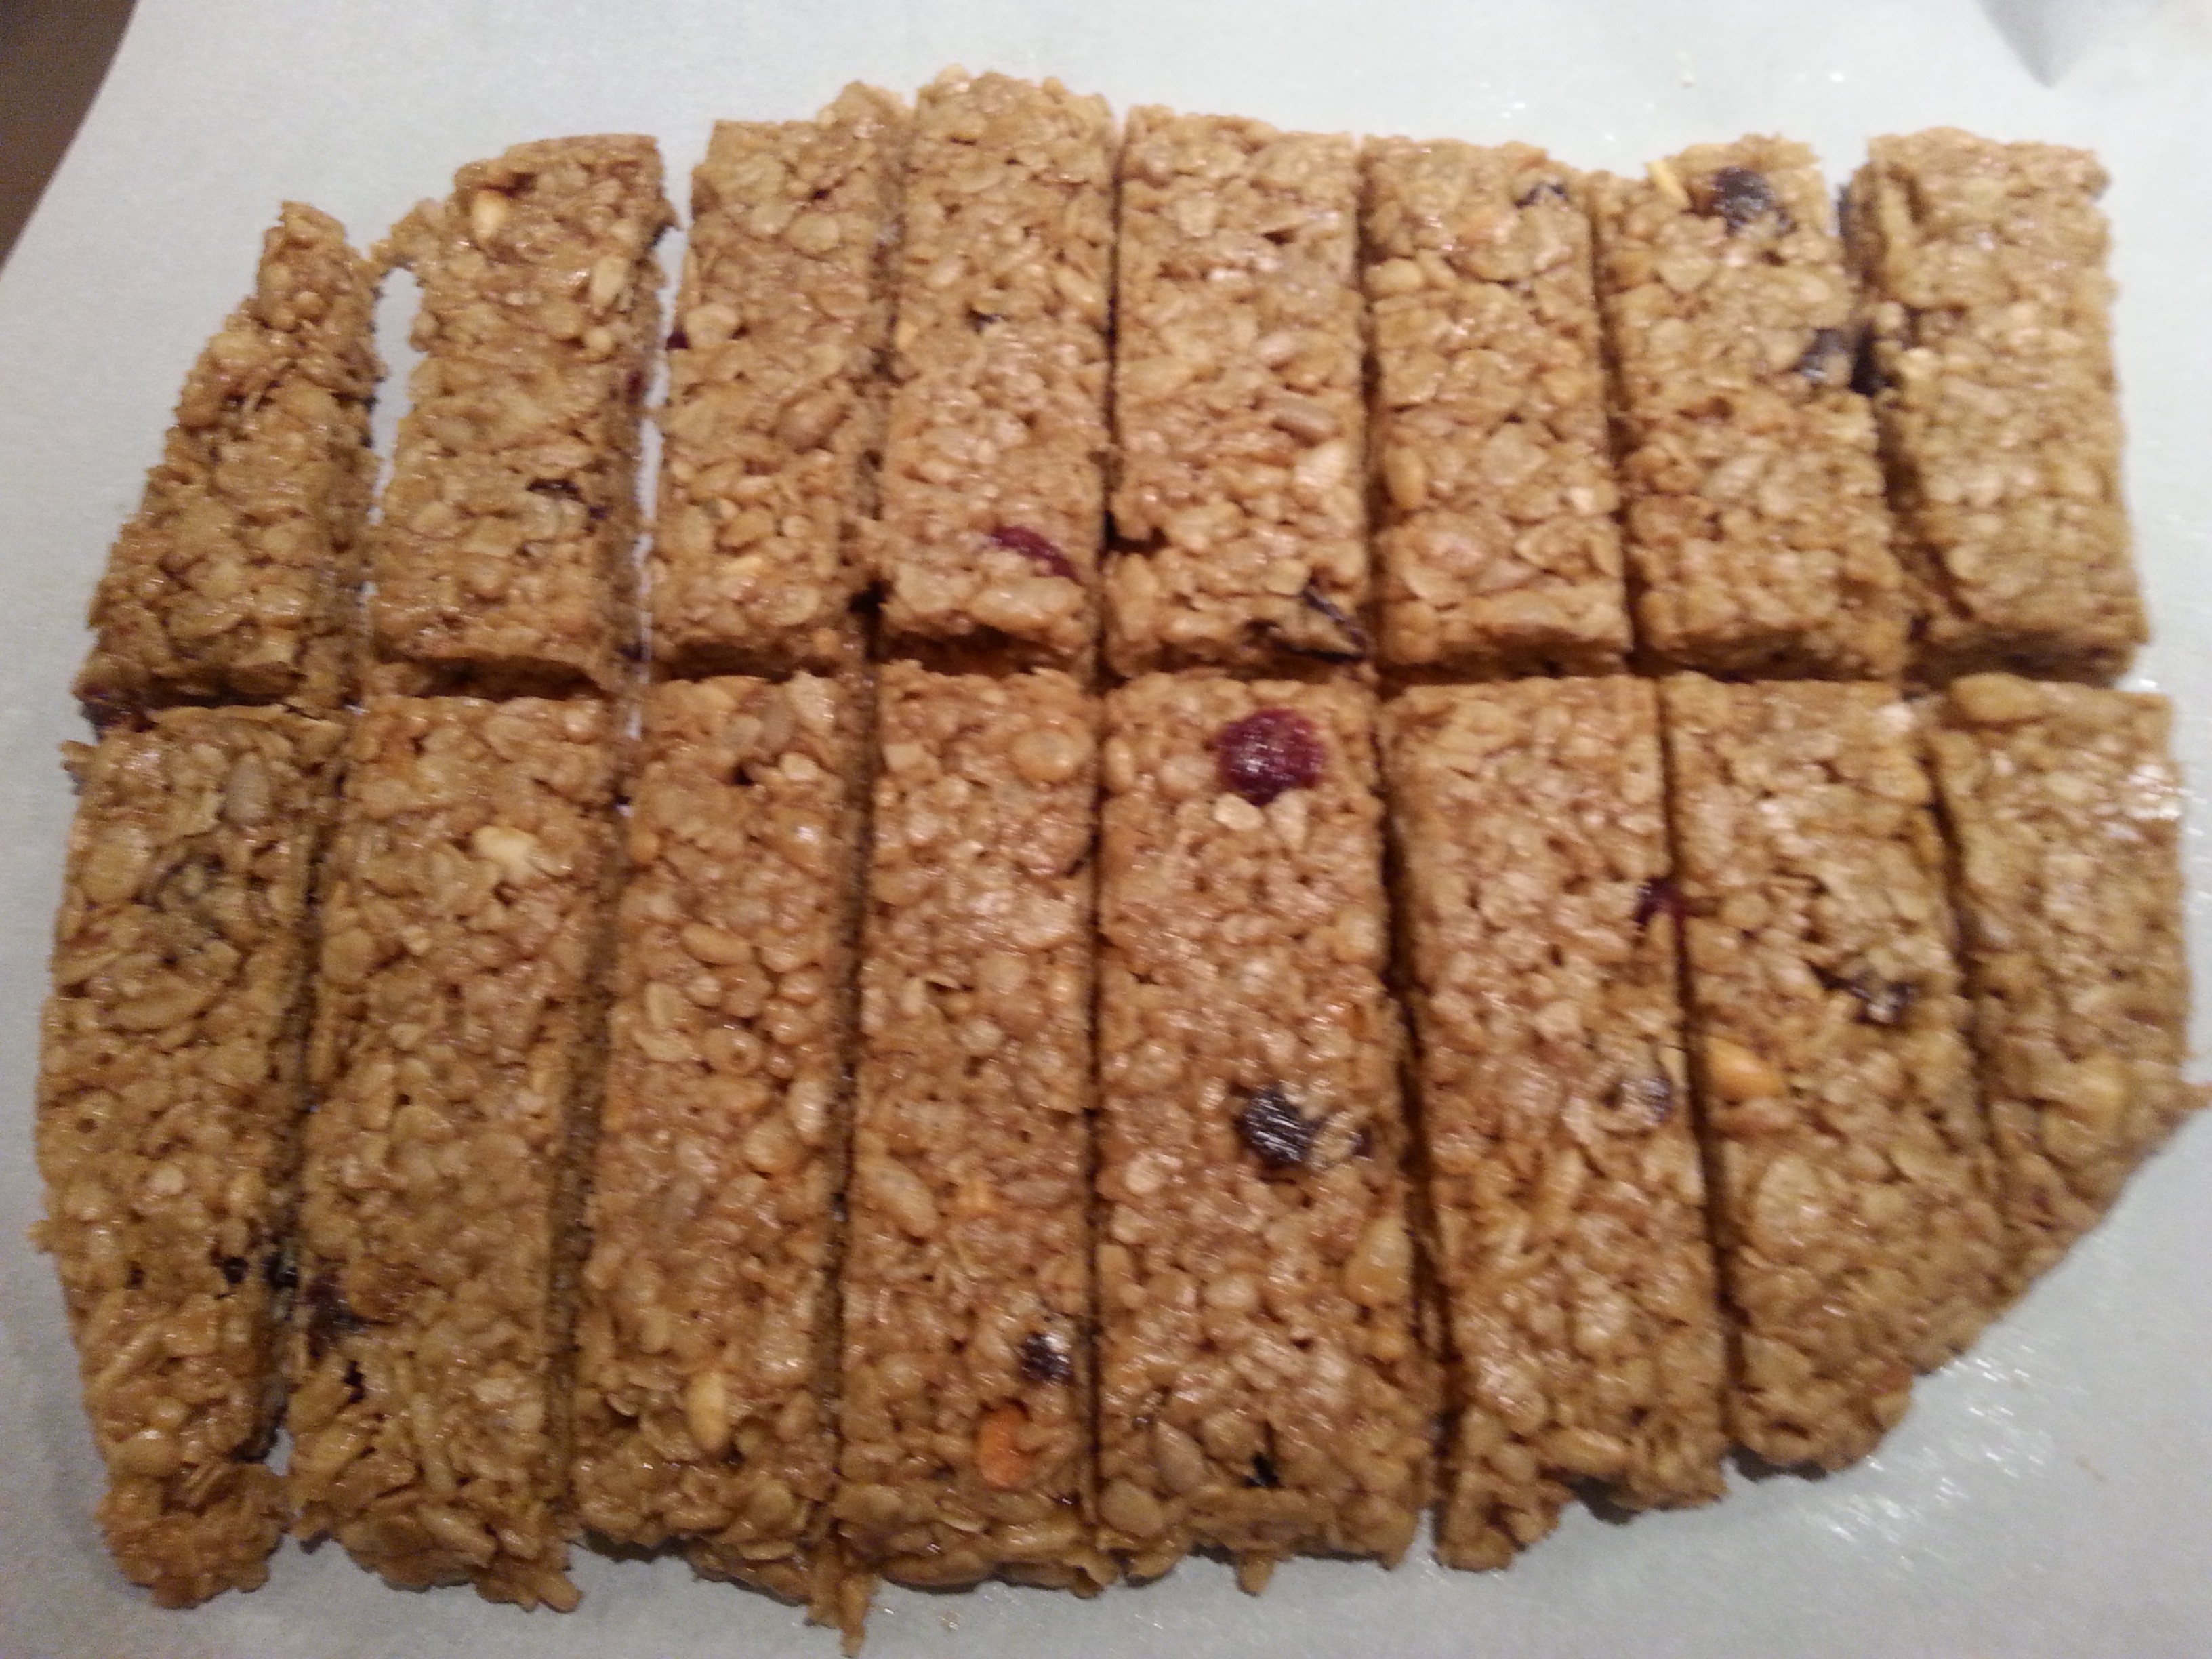 Homemade nut free chewy bars